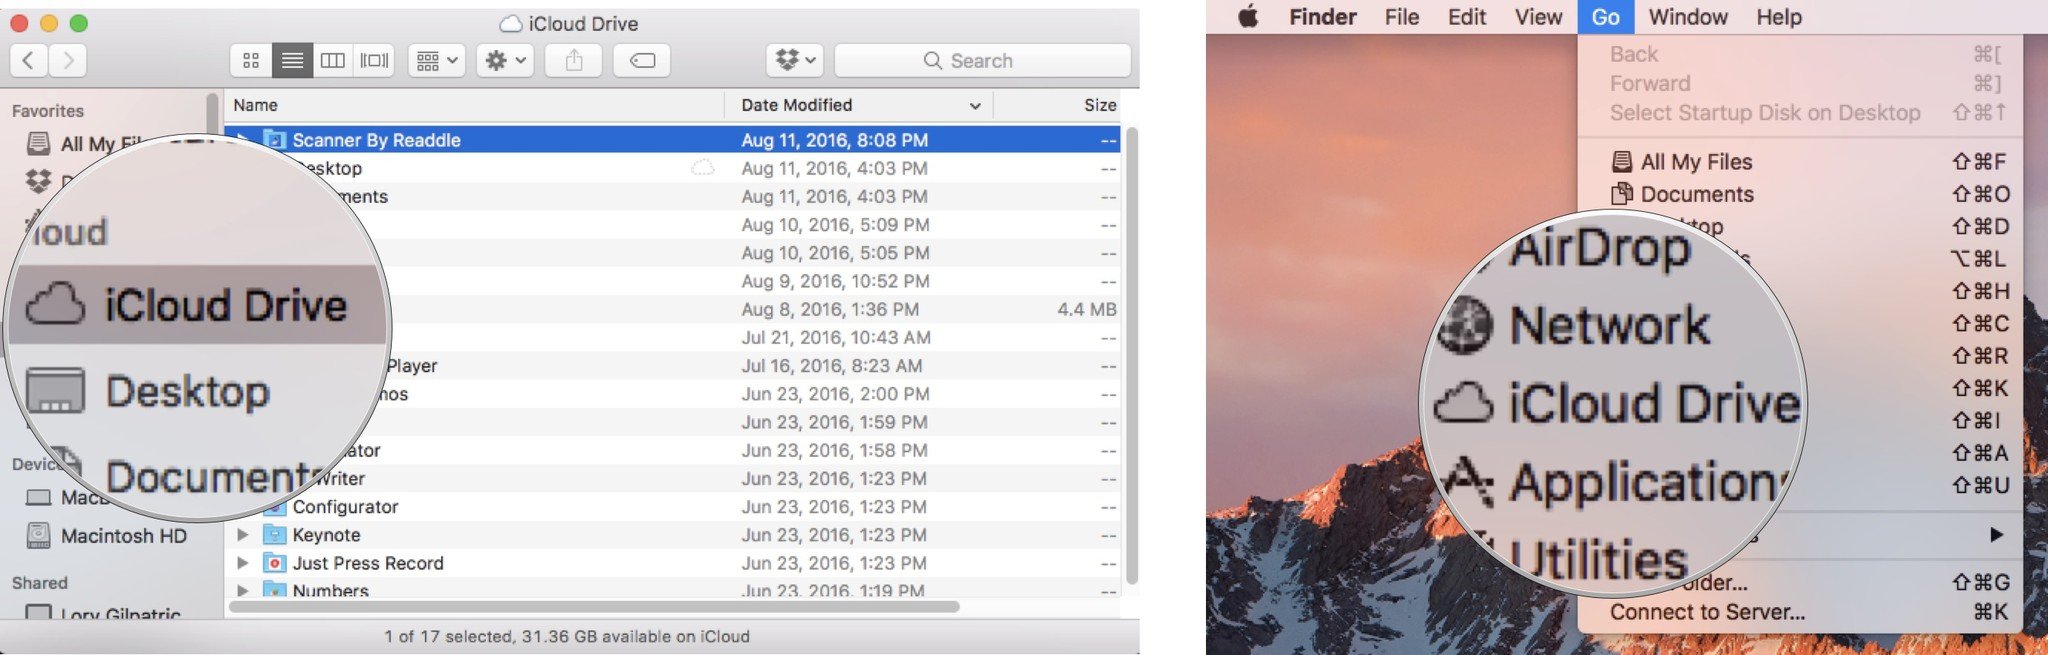 How to access iCloud Drive on Mac: In the Favorites section, Click iCloud Drive.